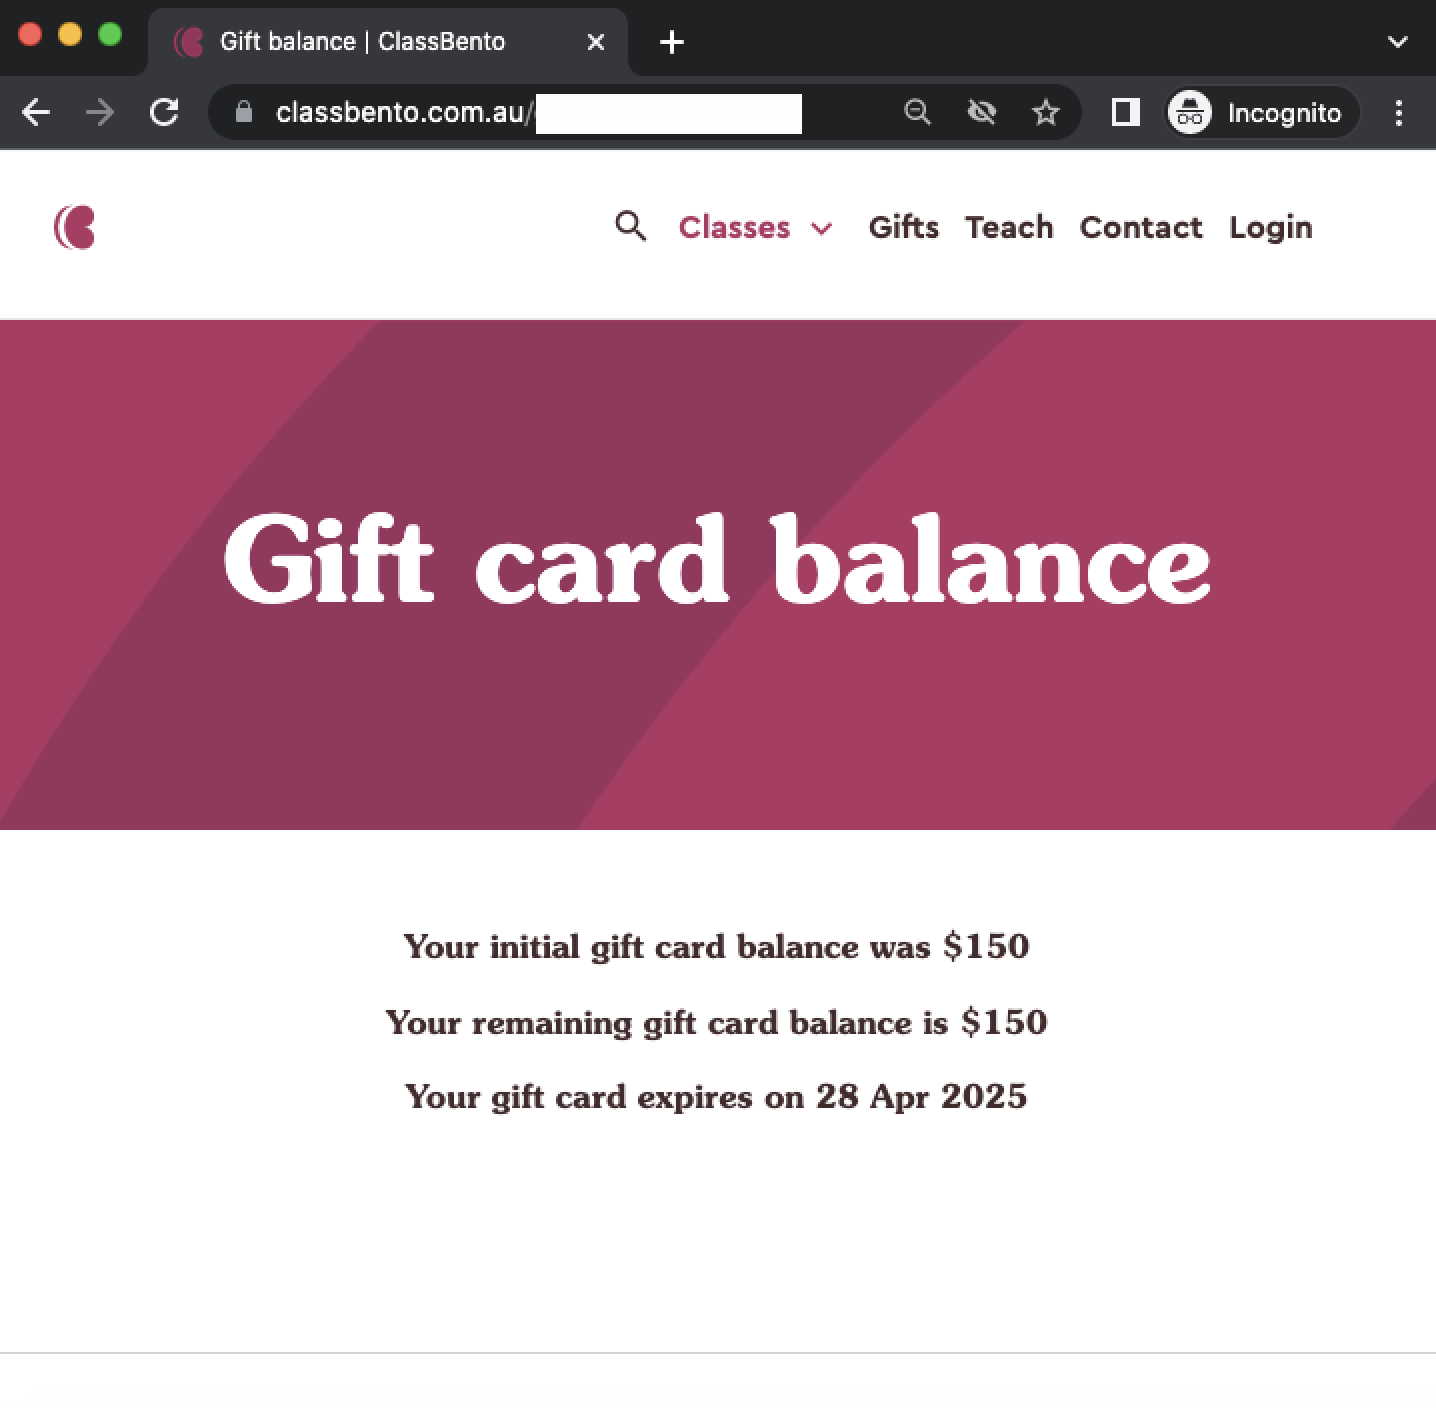 How do I determine the remaining balance on a gift card or e-gift card?